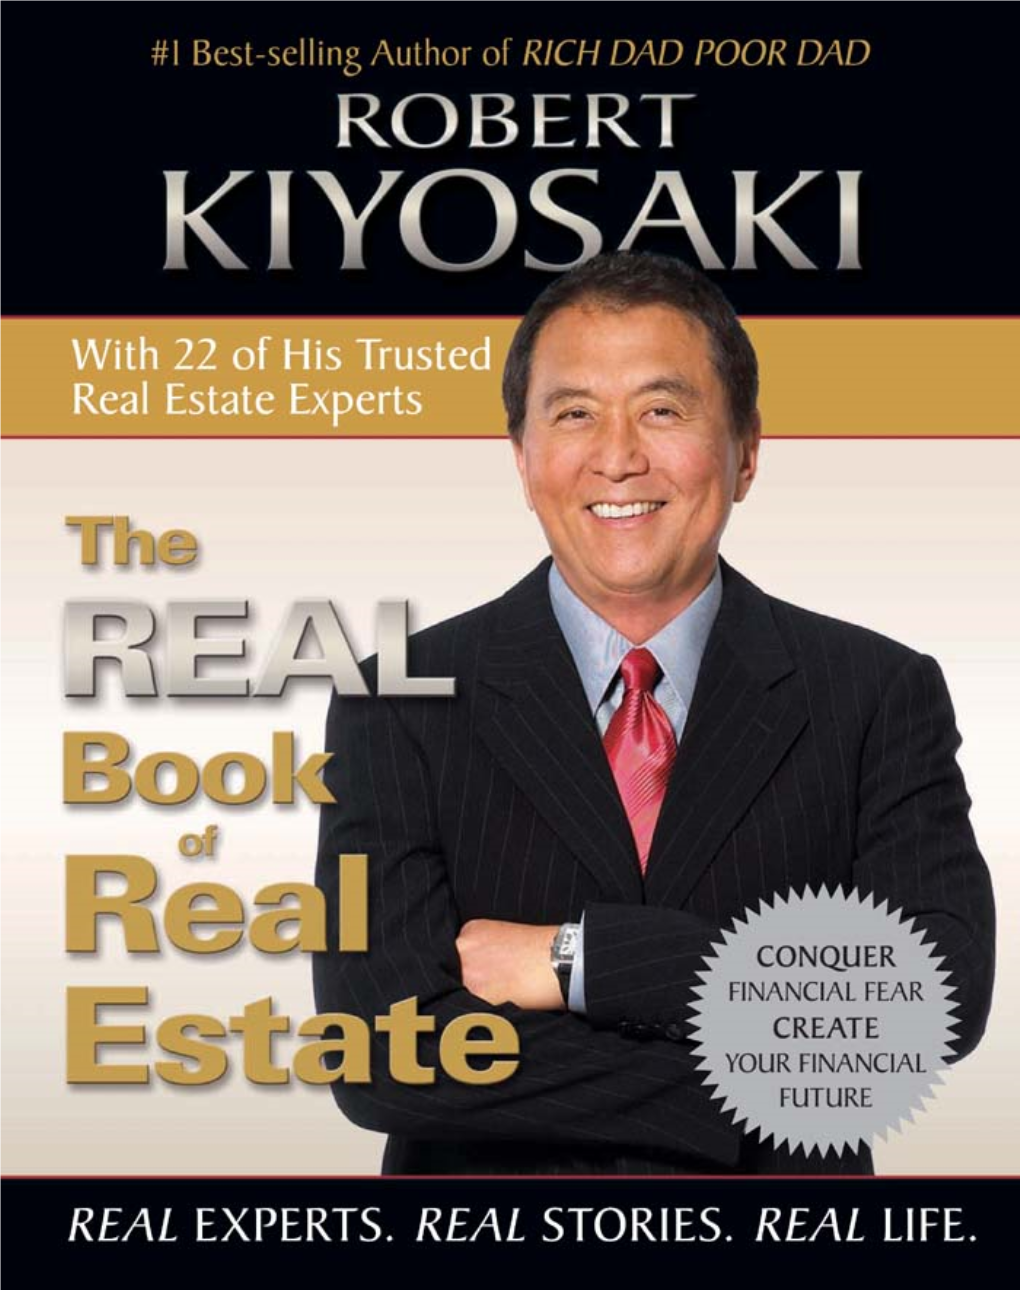 The REAL Book of Real Estate 9781593155322 FM:Real Estate New 3/25/09 3:52 PM Page Ii